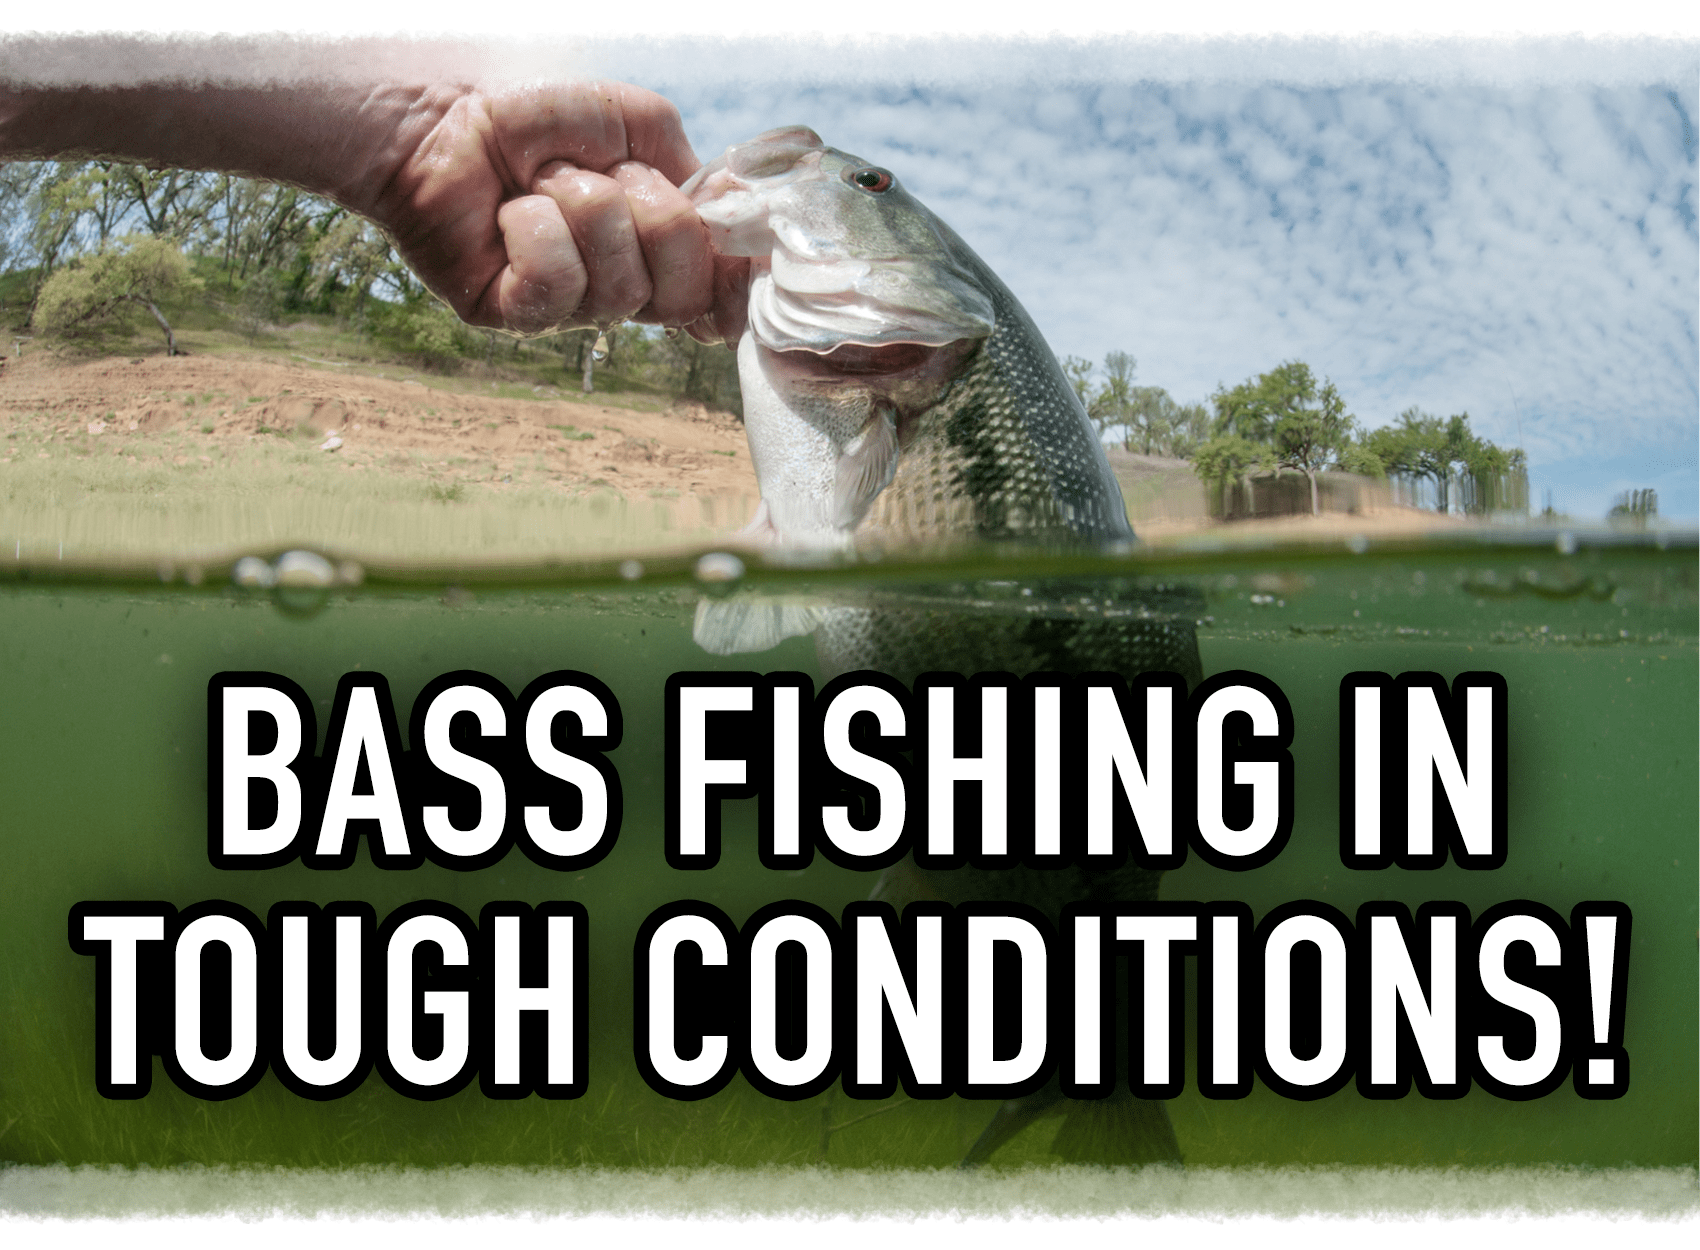 Spring Bass Fishing in Tough Conditions!